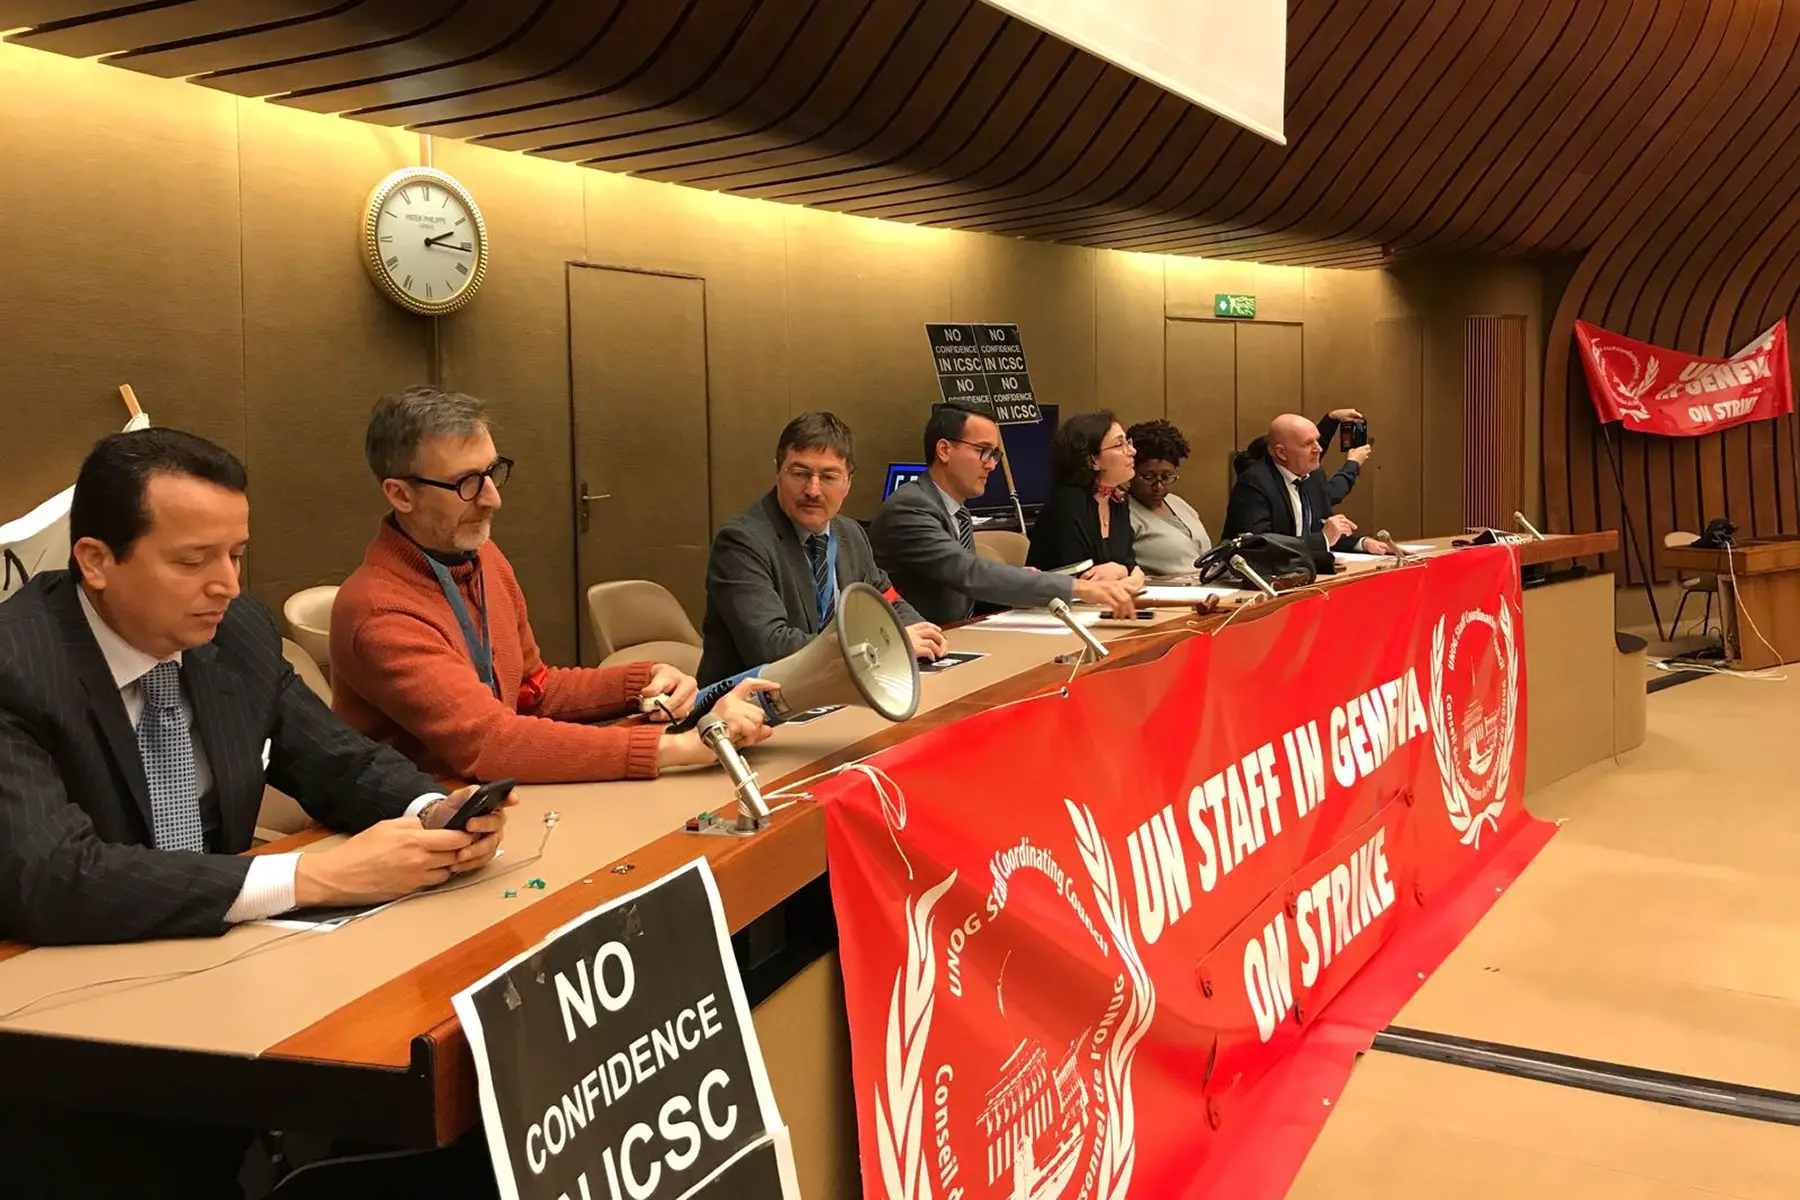 Staff at the UN on strike, sitting at a desk with a large red banner reading 'UN STAFF IN GENEVA ON STRIKE'